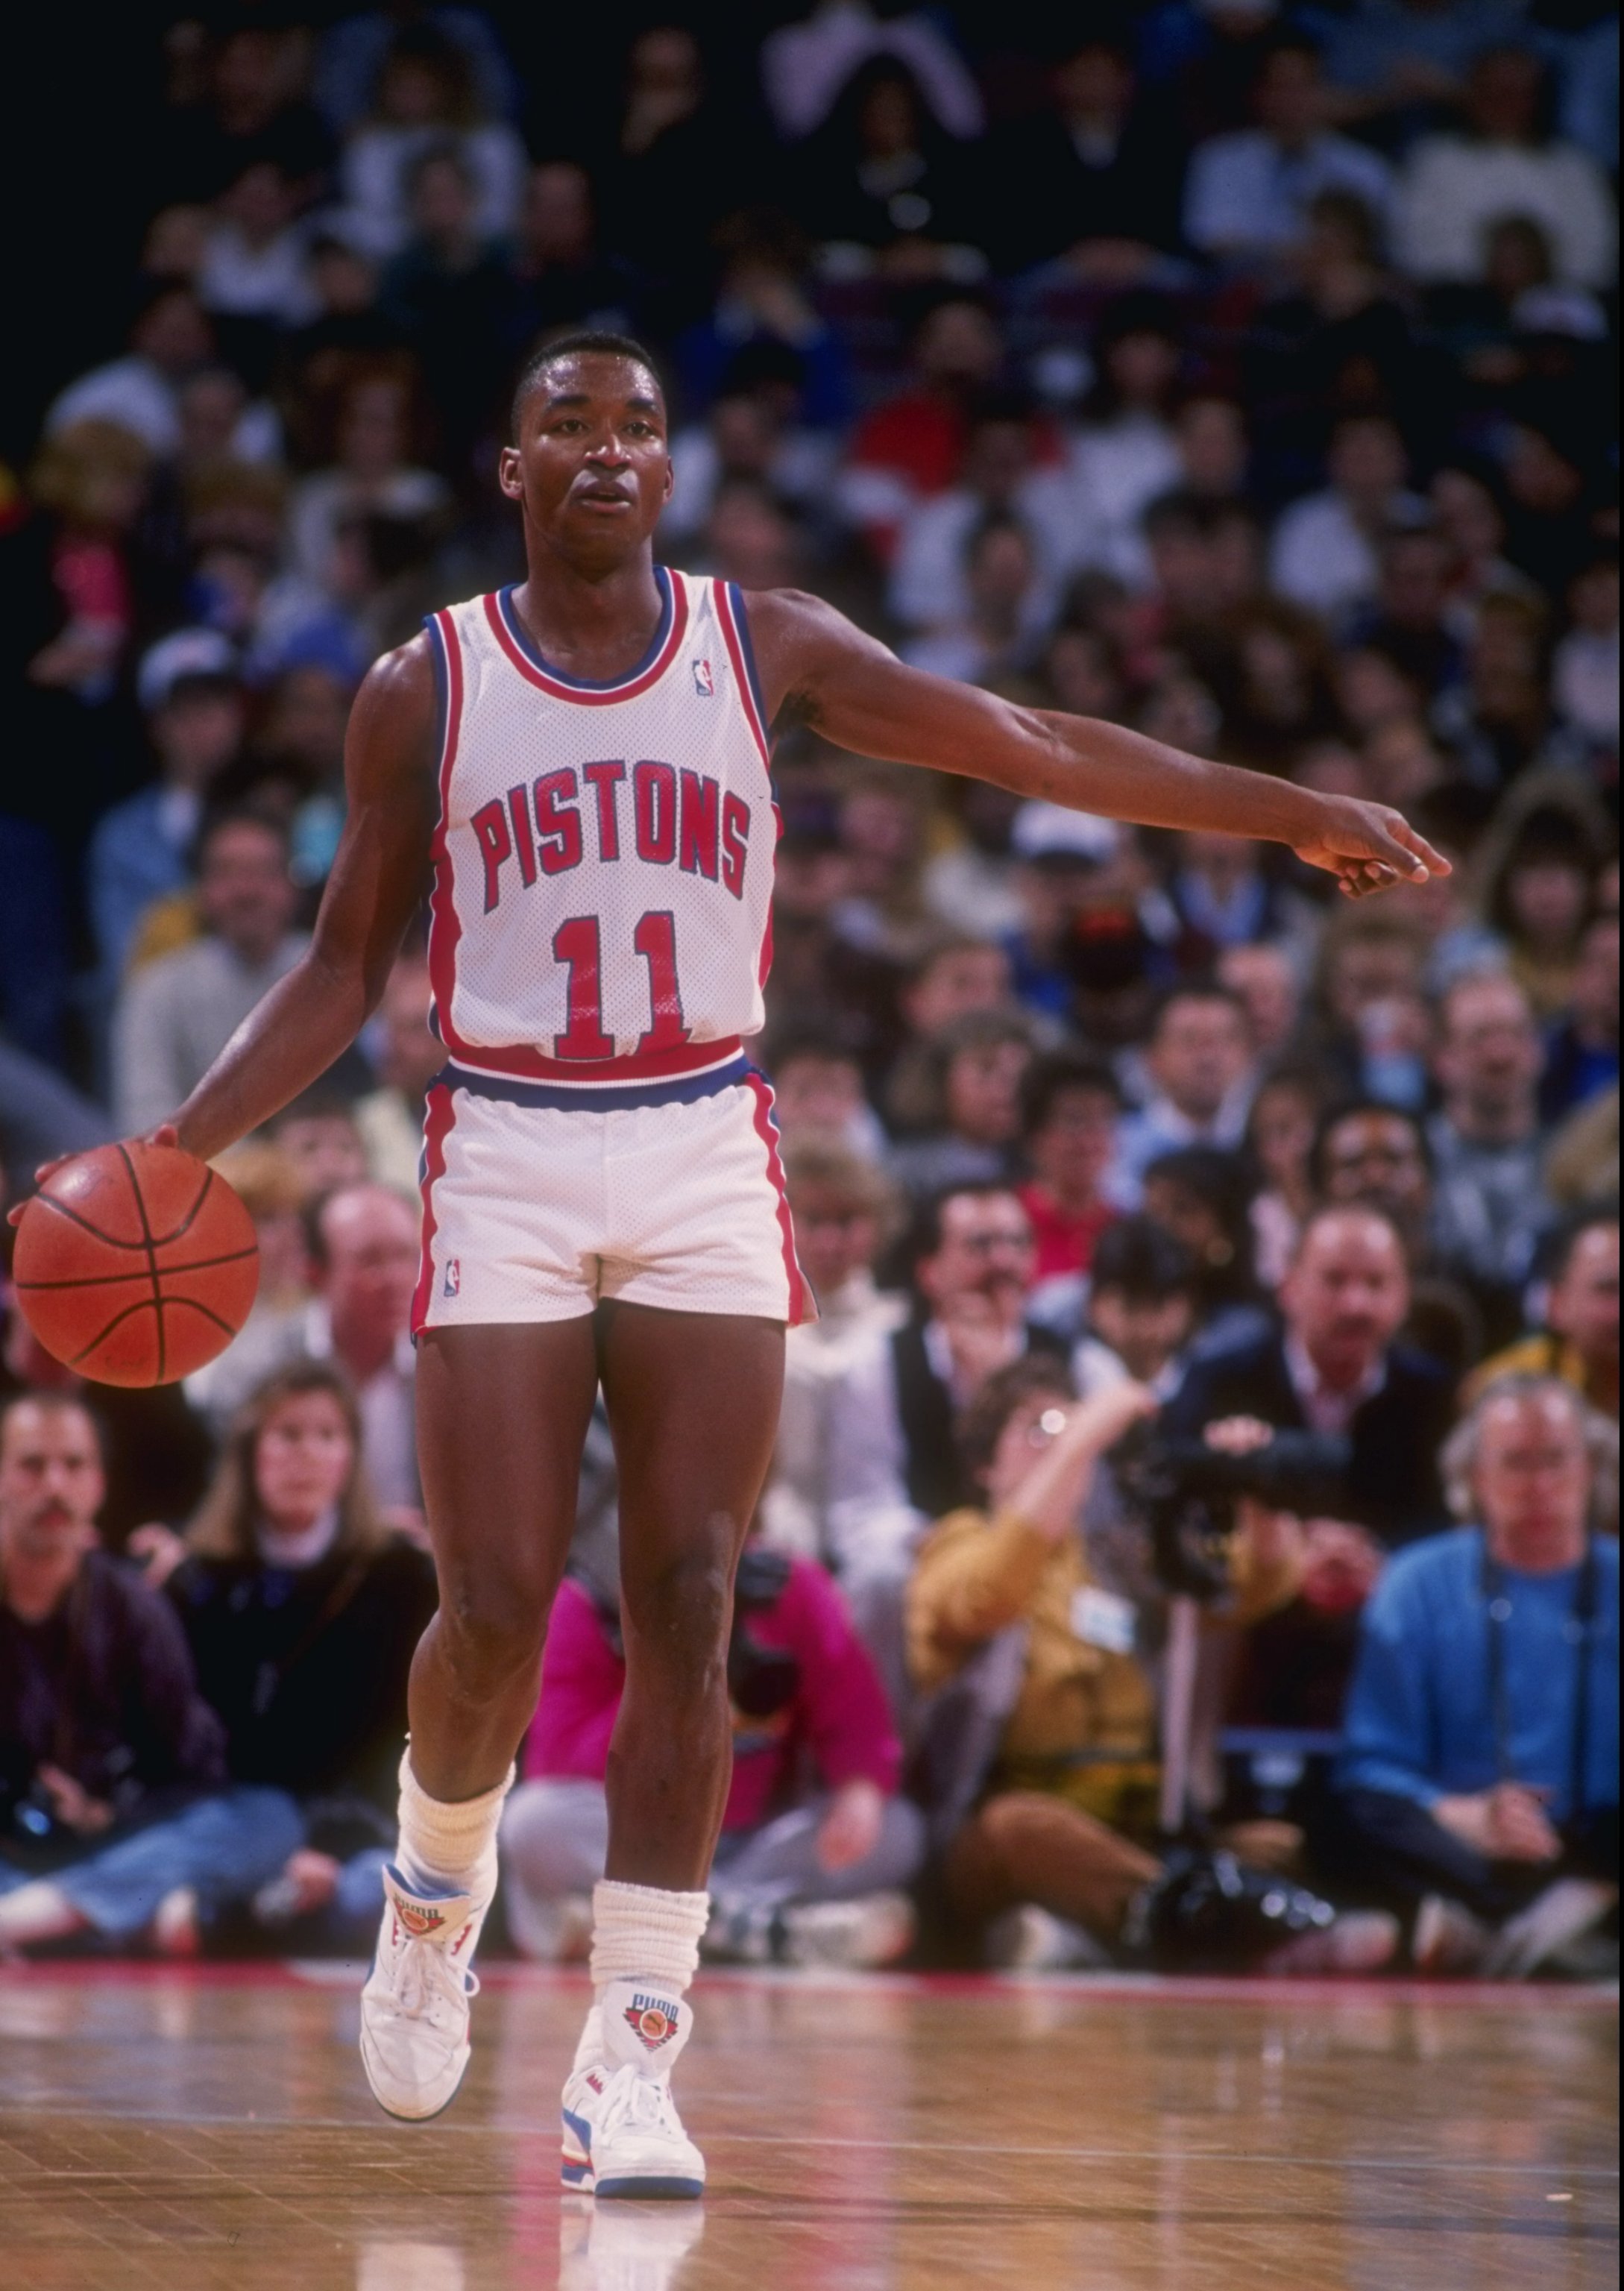 1989-1990:  Guard Isiah Thomas of the Detroit Pistons moves the ball during a game. Mandatory Credit: Allsport  /Allsport Mandatory Credit: Allsport  /Allsport